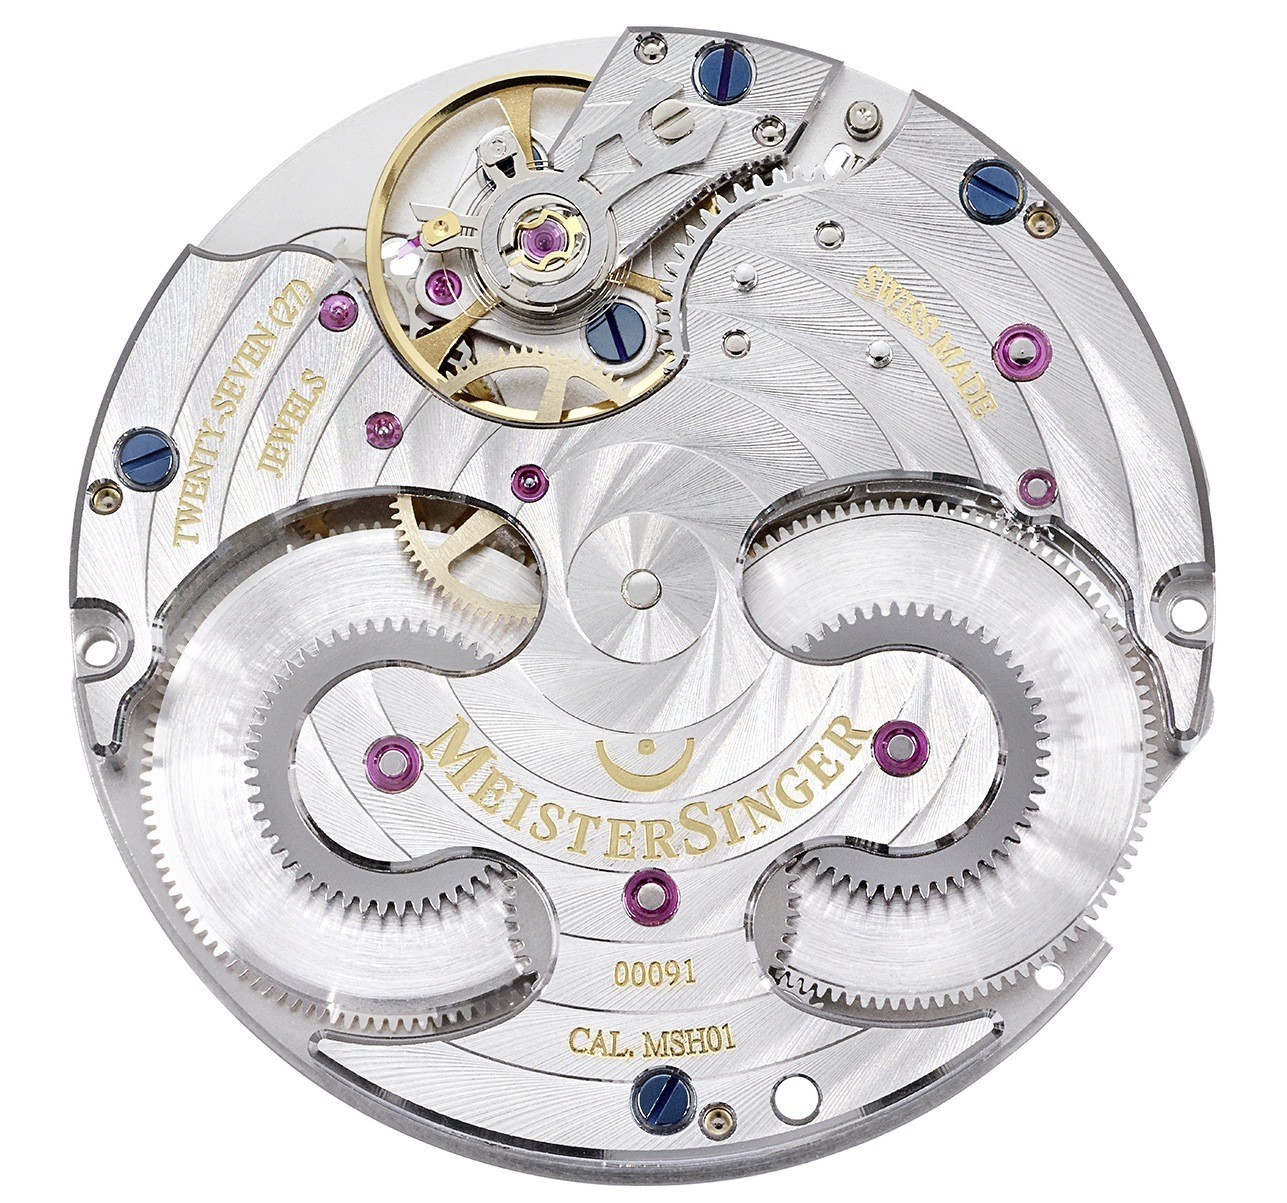 MeisterSinger Circularis Debuts New Bespoke Movement With 5-Day Power Reserve Watch Releases 